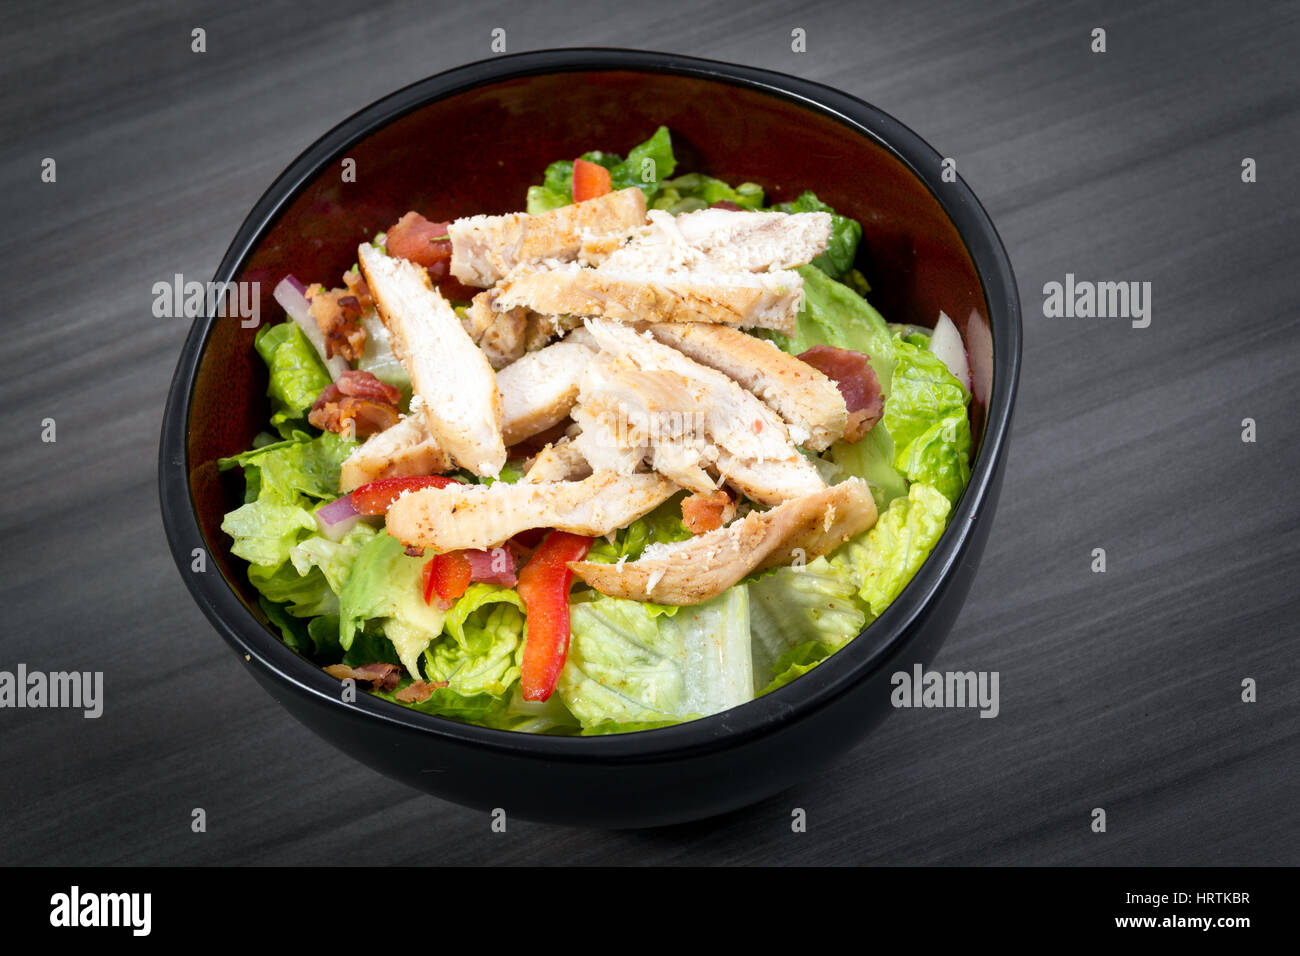 grilled chicken and bacon salad over a wood table closeup Stock Photo